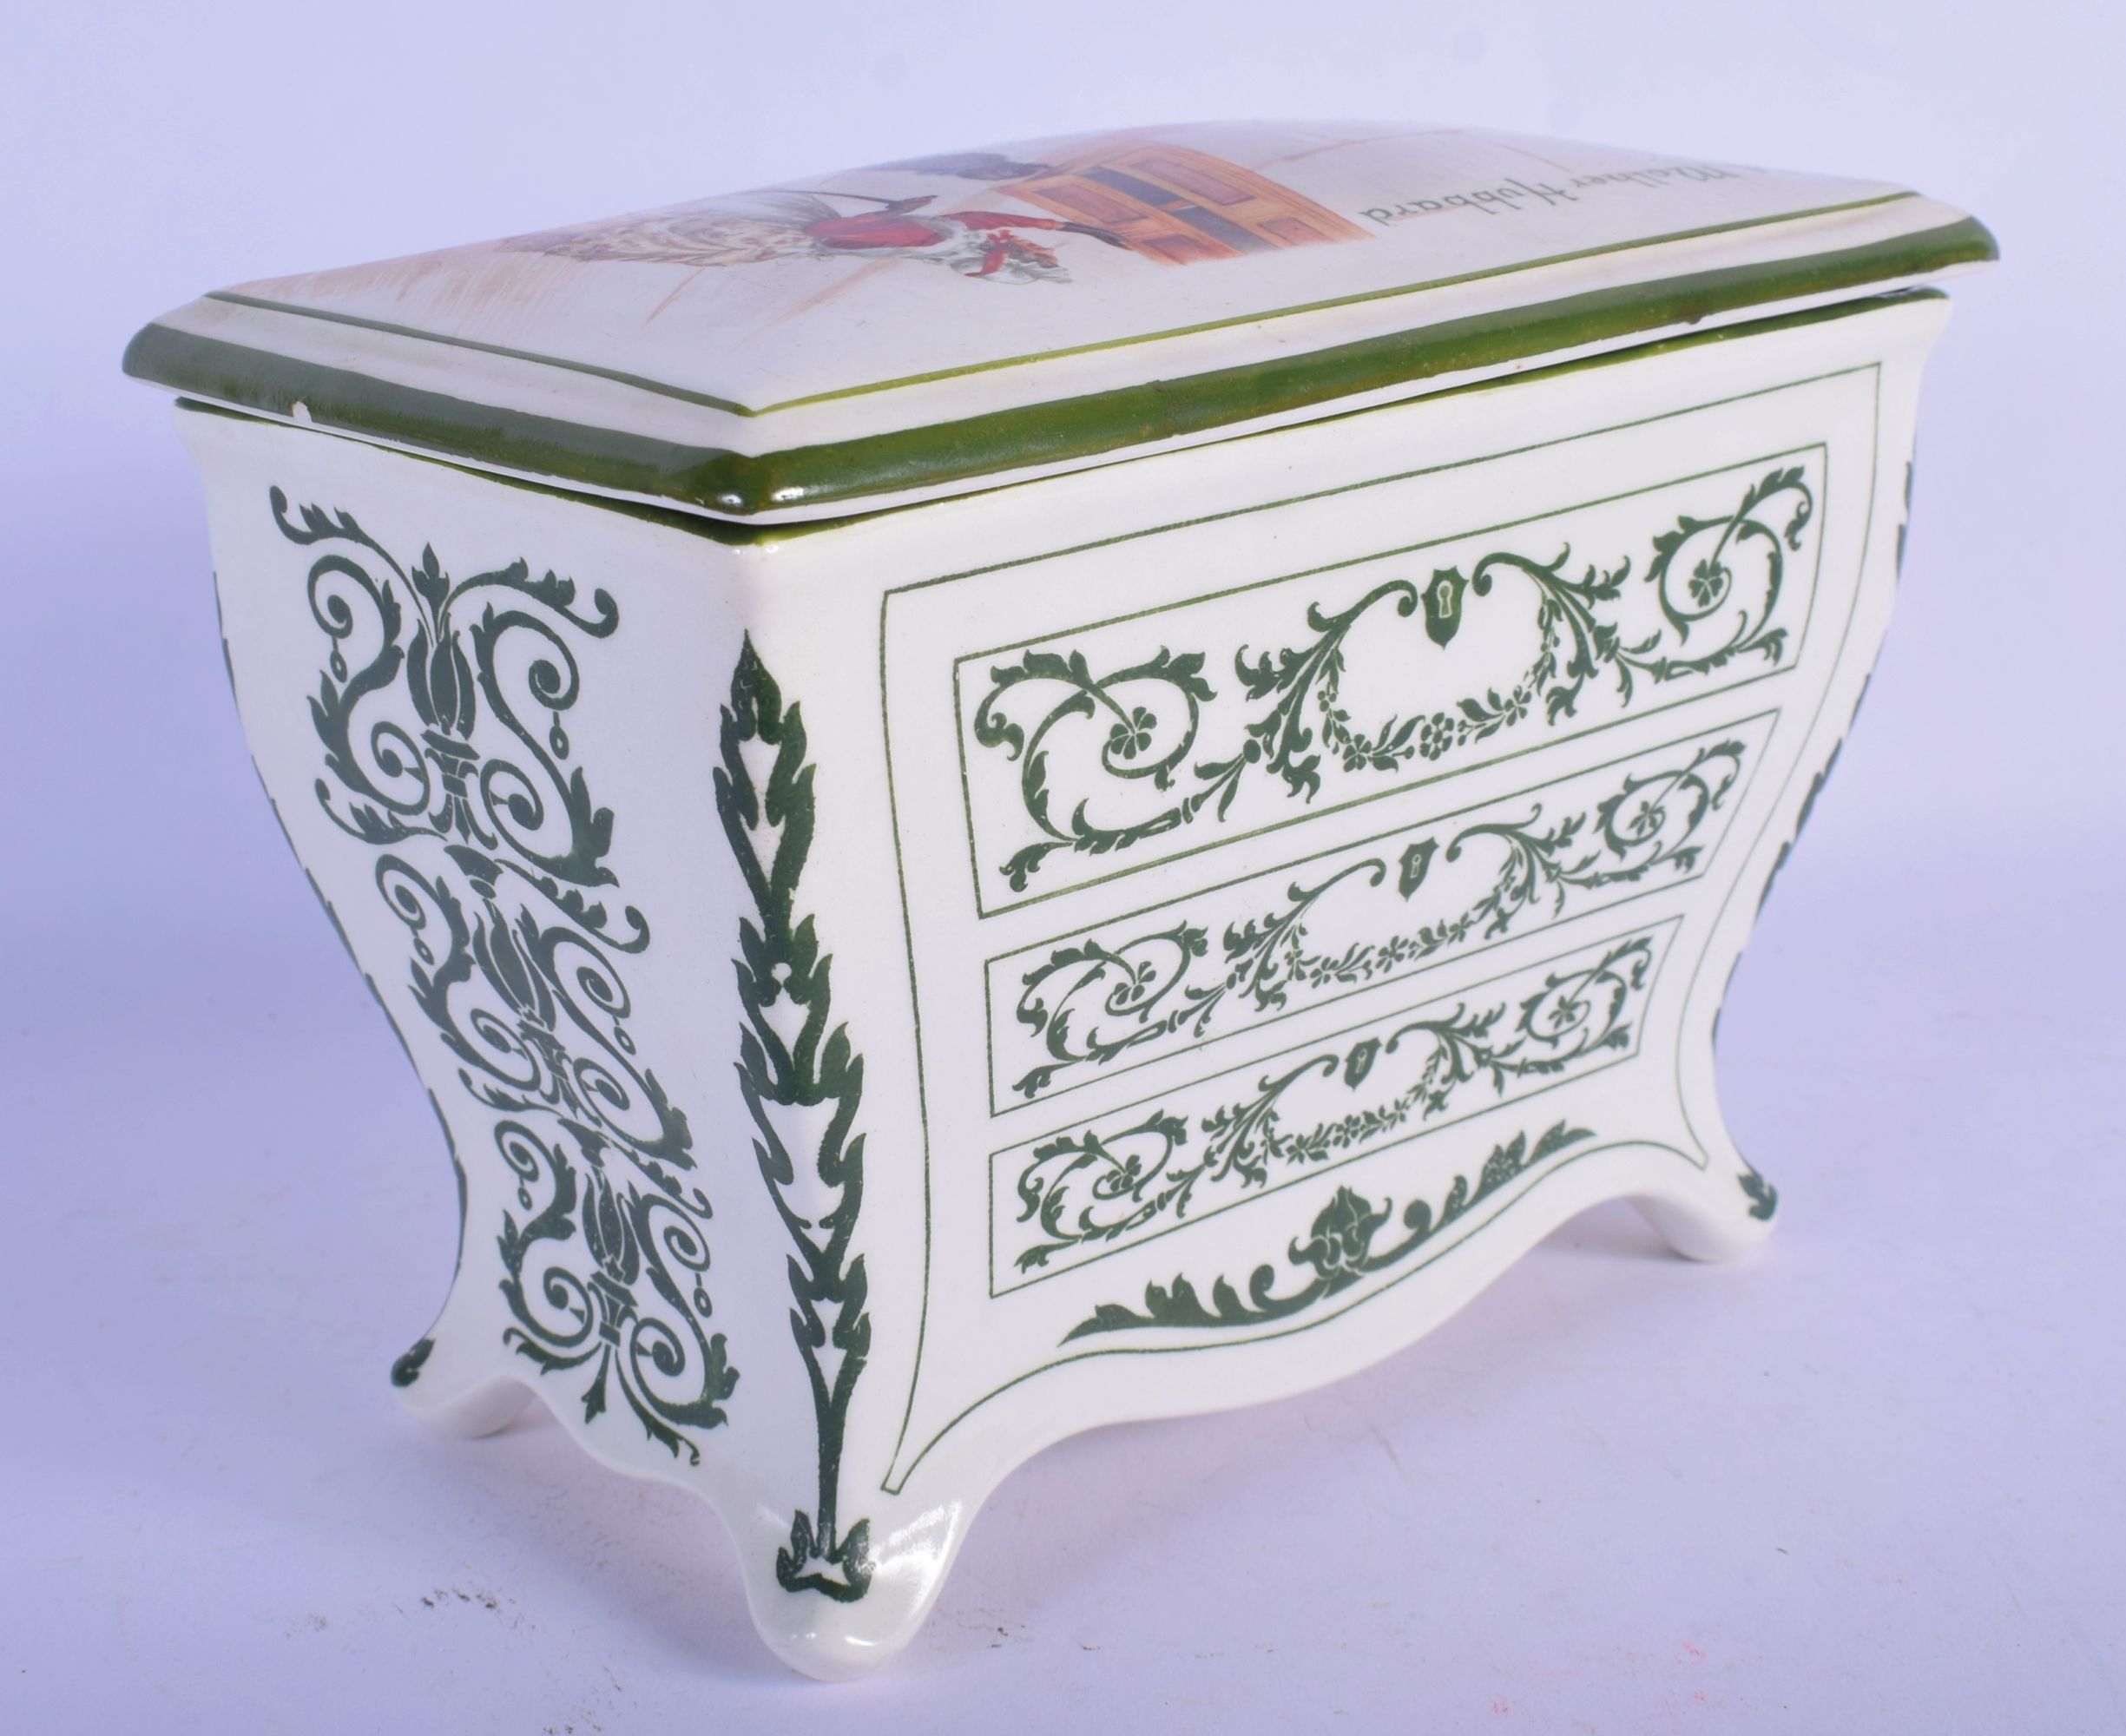 A ROYAL DOULTON HUNTLEY & PALMERS CHEST OF DRAWERS BOX AND COVER Old Mother Hubbard. 18 cm x 13 cm. - Image 2 of 6